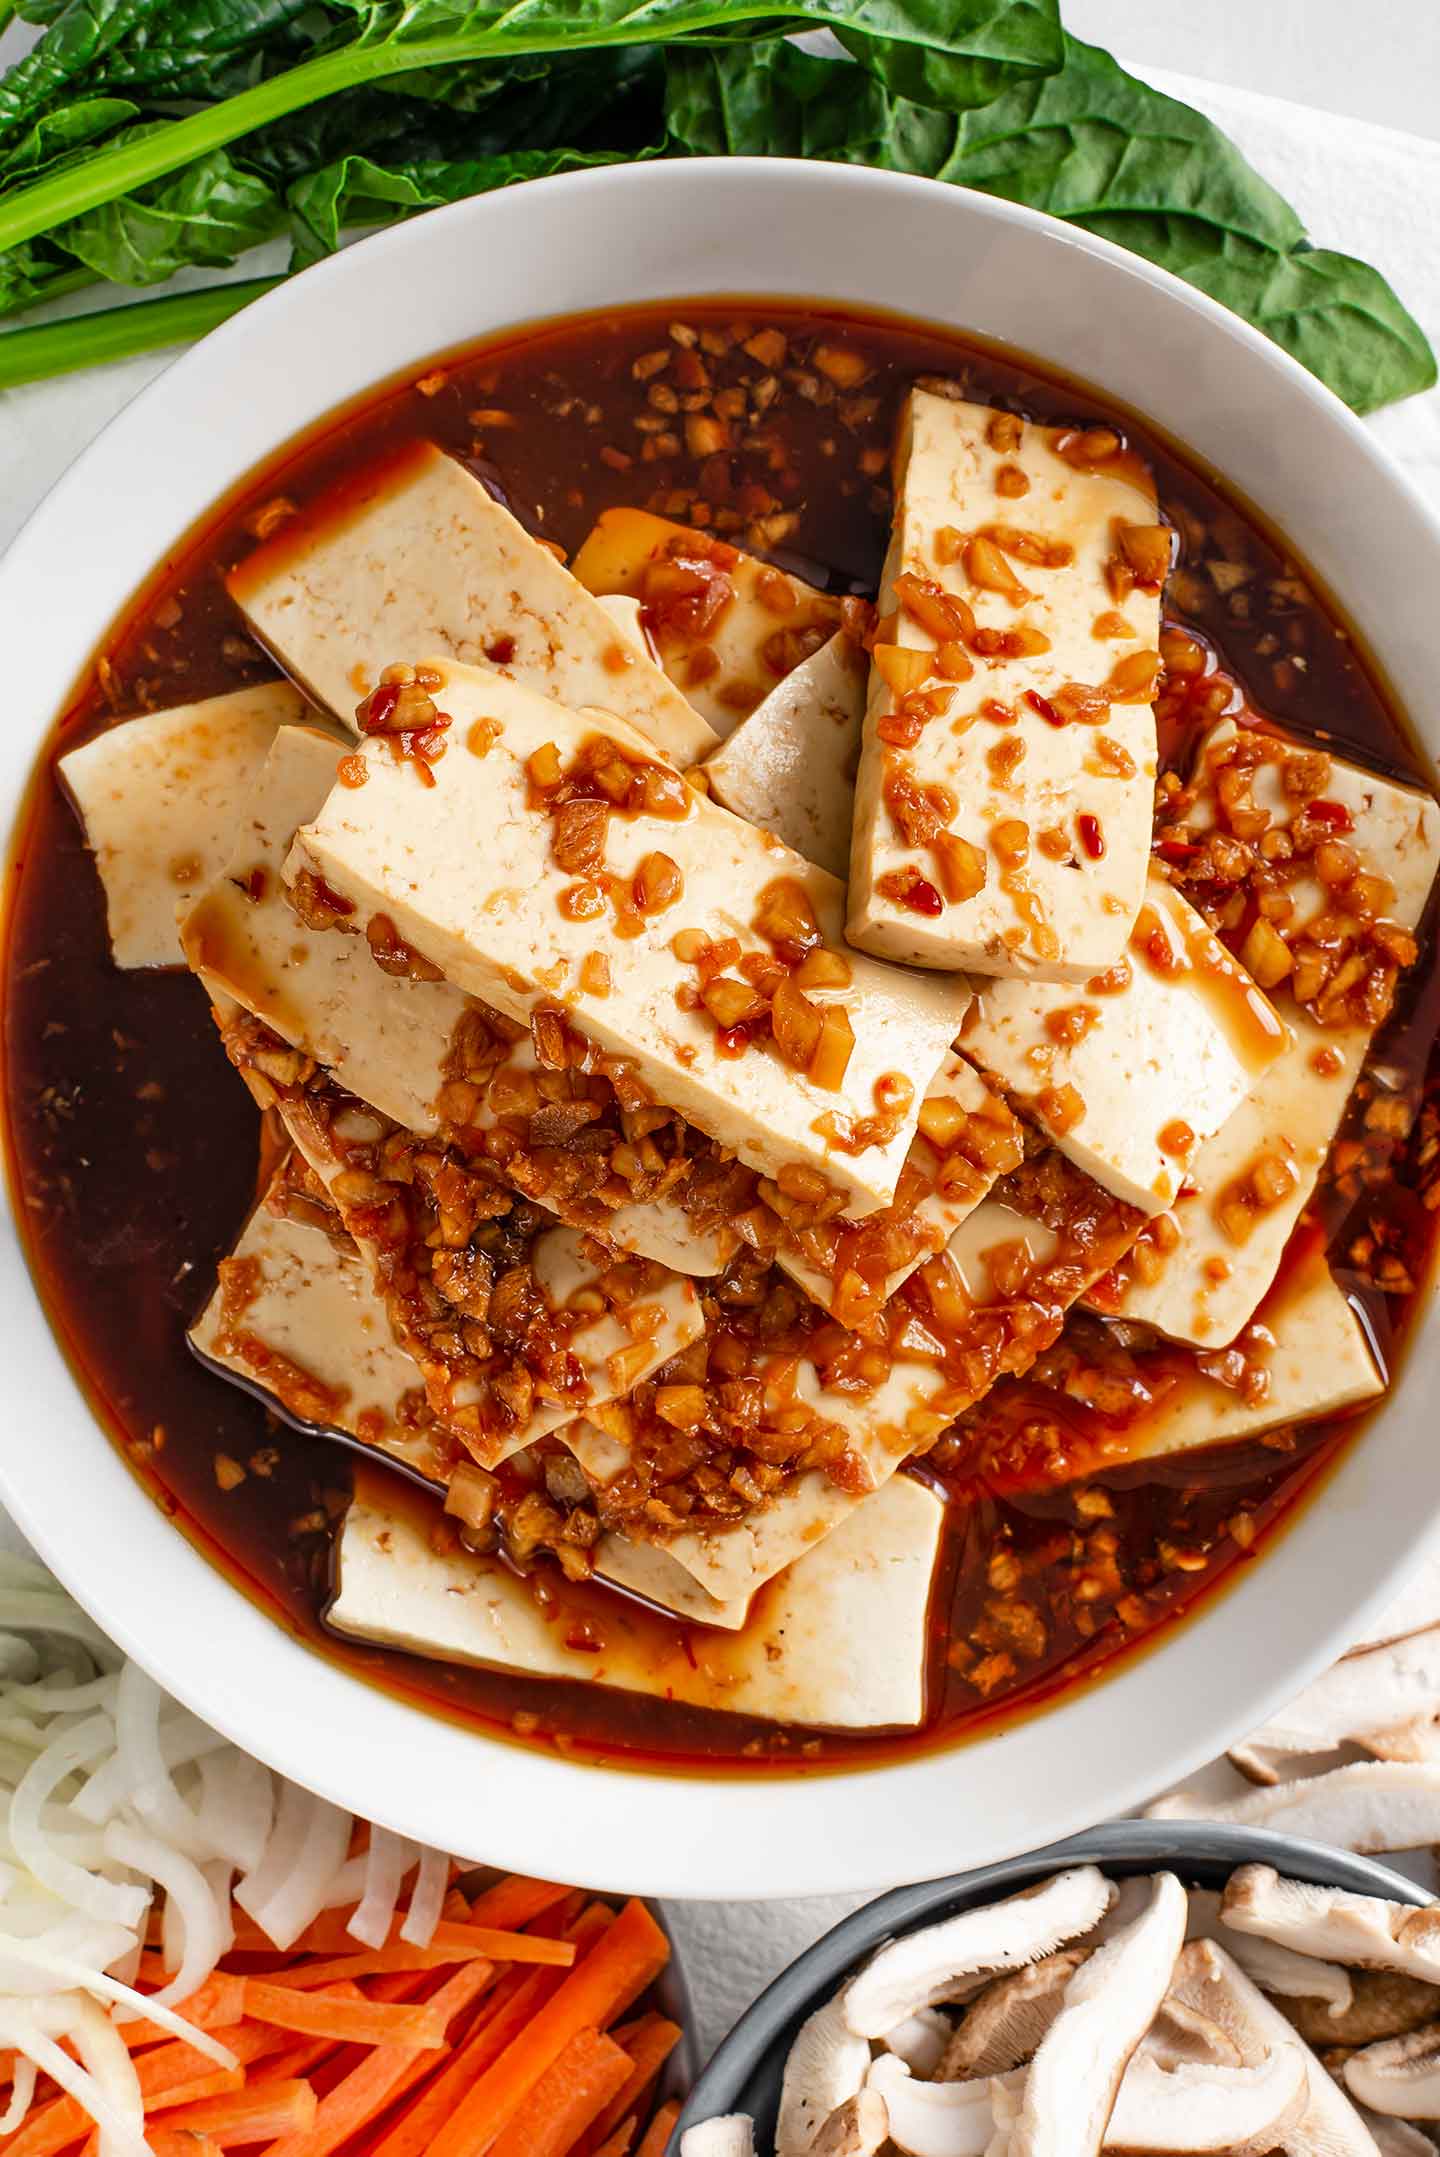 Top down view of sliced tofu in a shallow dish with a ginger, garlic, sweet and spicy sauce.